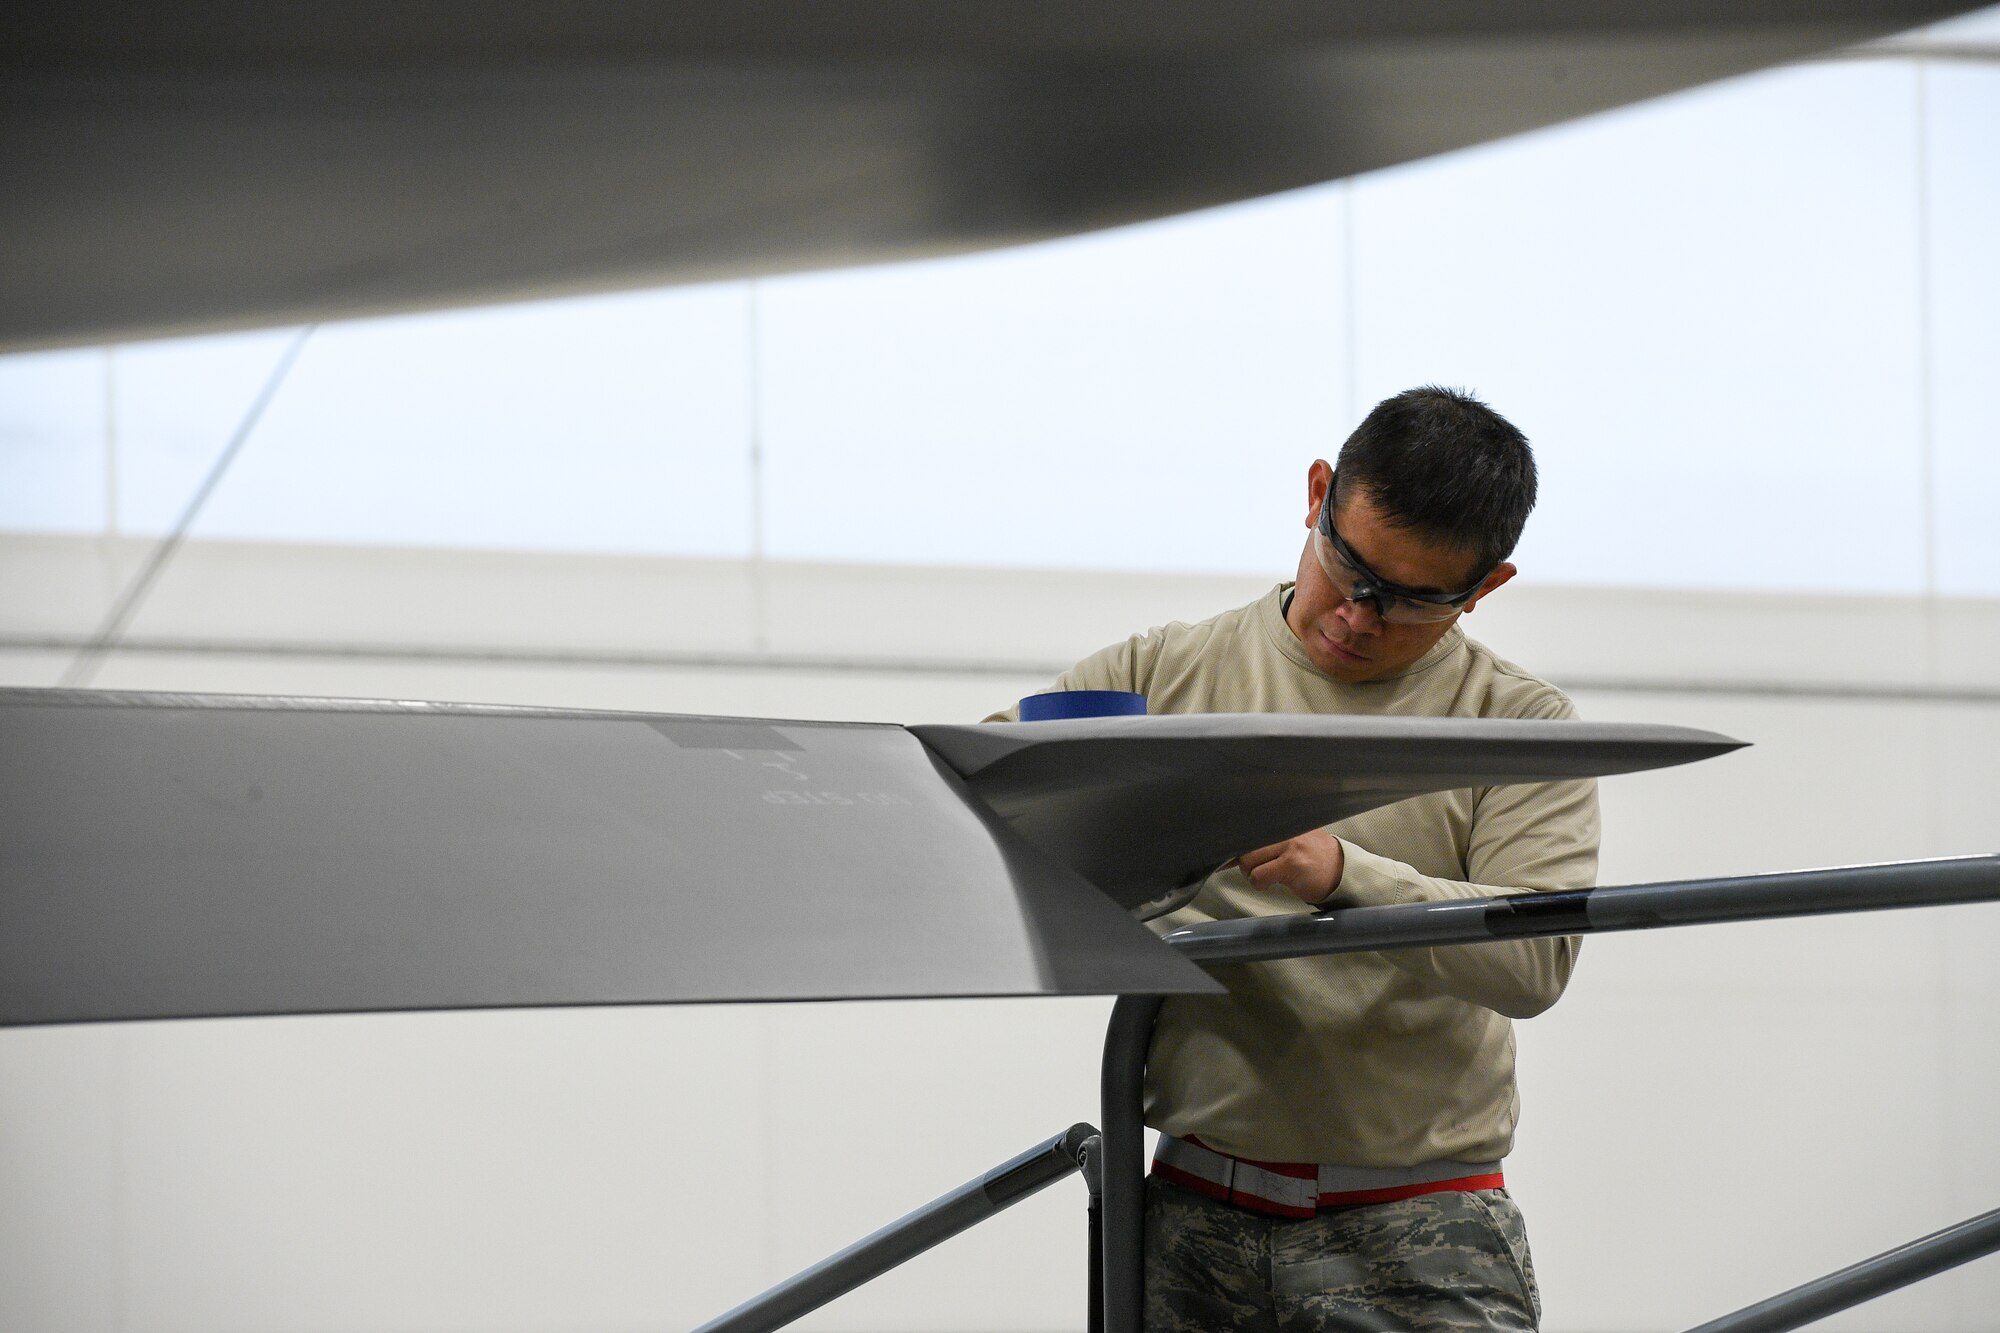 Tech. Sgt. Edmundo Pena, 388th Maintenance Squadron Fabrication Flight, performs a low observable restoration on a F-35A Lightning II wing tip at Hill Air Force Base, Utah, Oct. 3, 2019. The radar aborbent surface coatings on the F-35 help the aircraft survive in enemy air space. (U.S. Air Force photo by R. Nial Bradshaw)